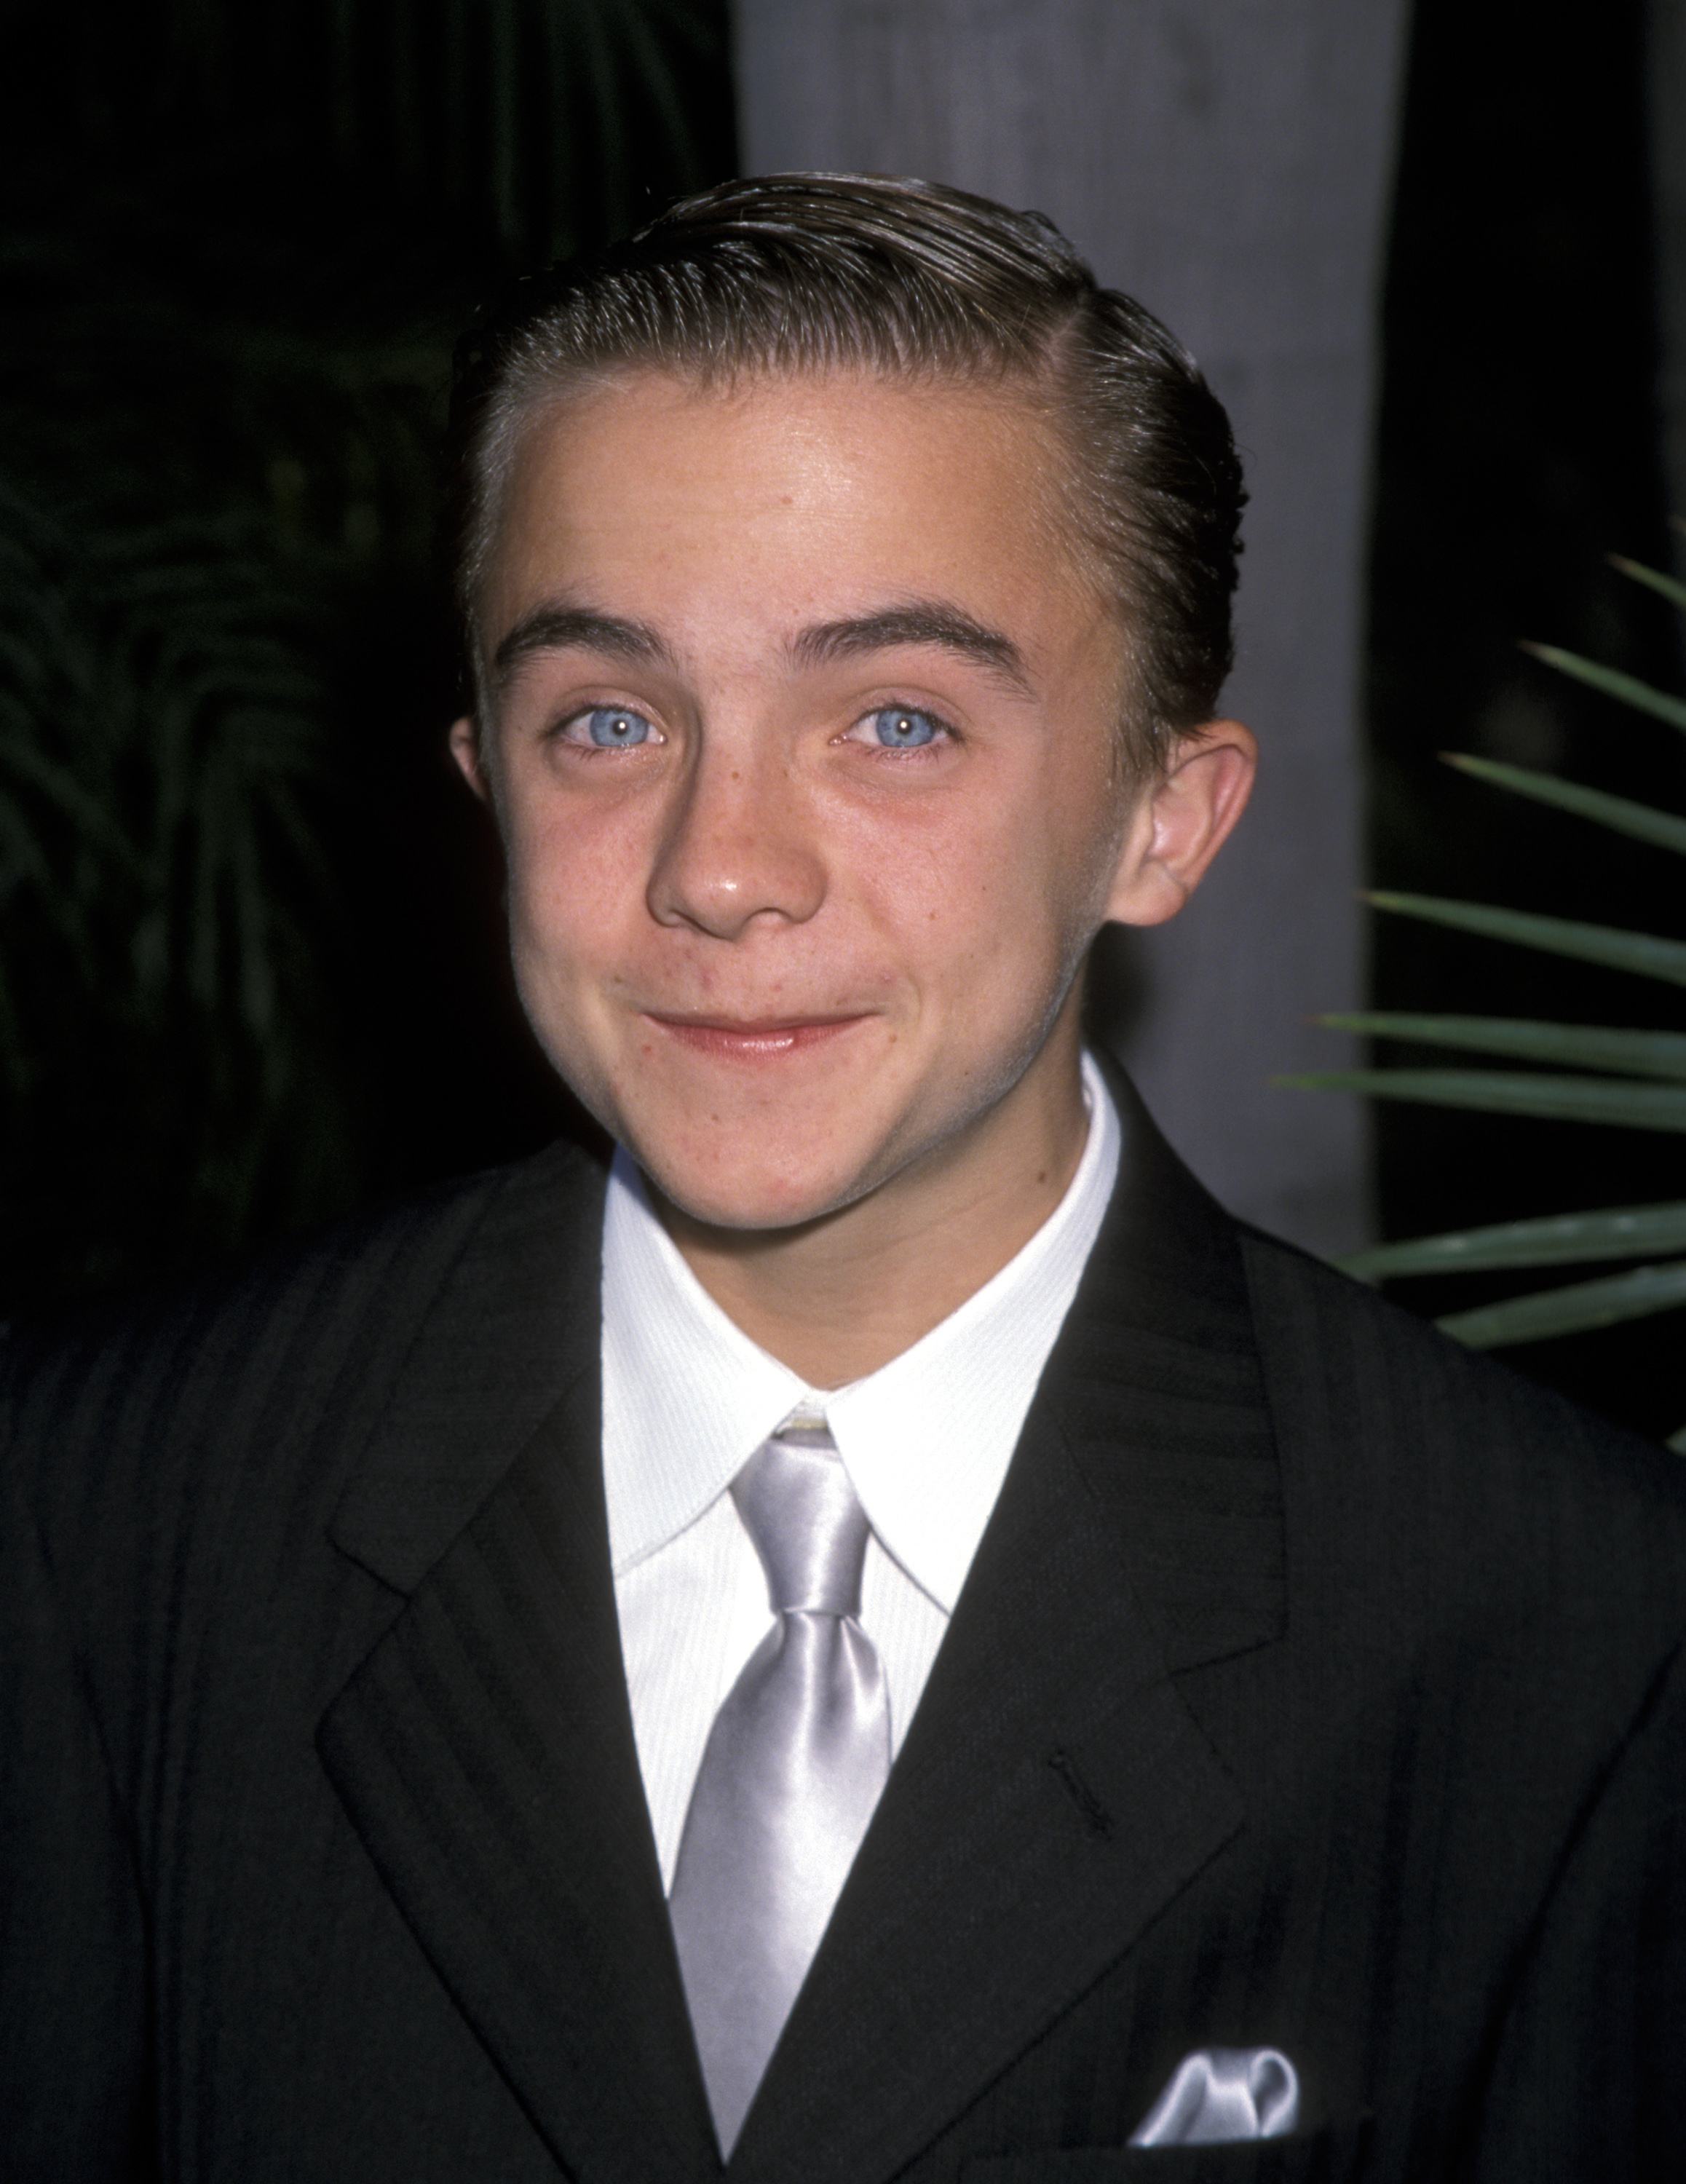 Frankie Muniz attends the 2000 Summer Television Critic Association Awards on July 15, 2000 in Pasadena, California | Source: Getty Images